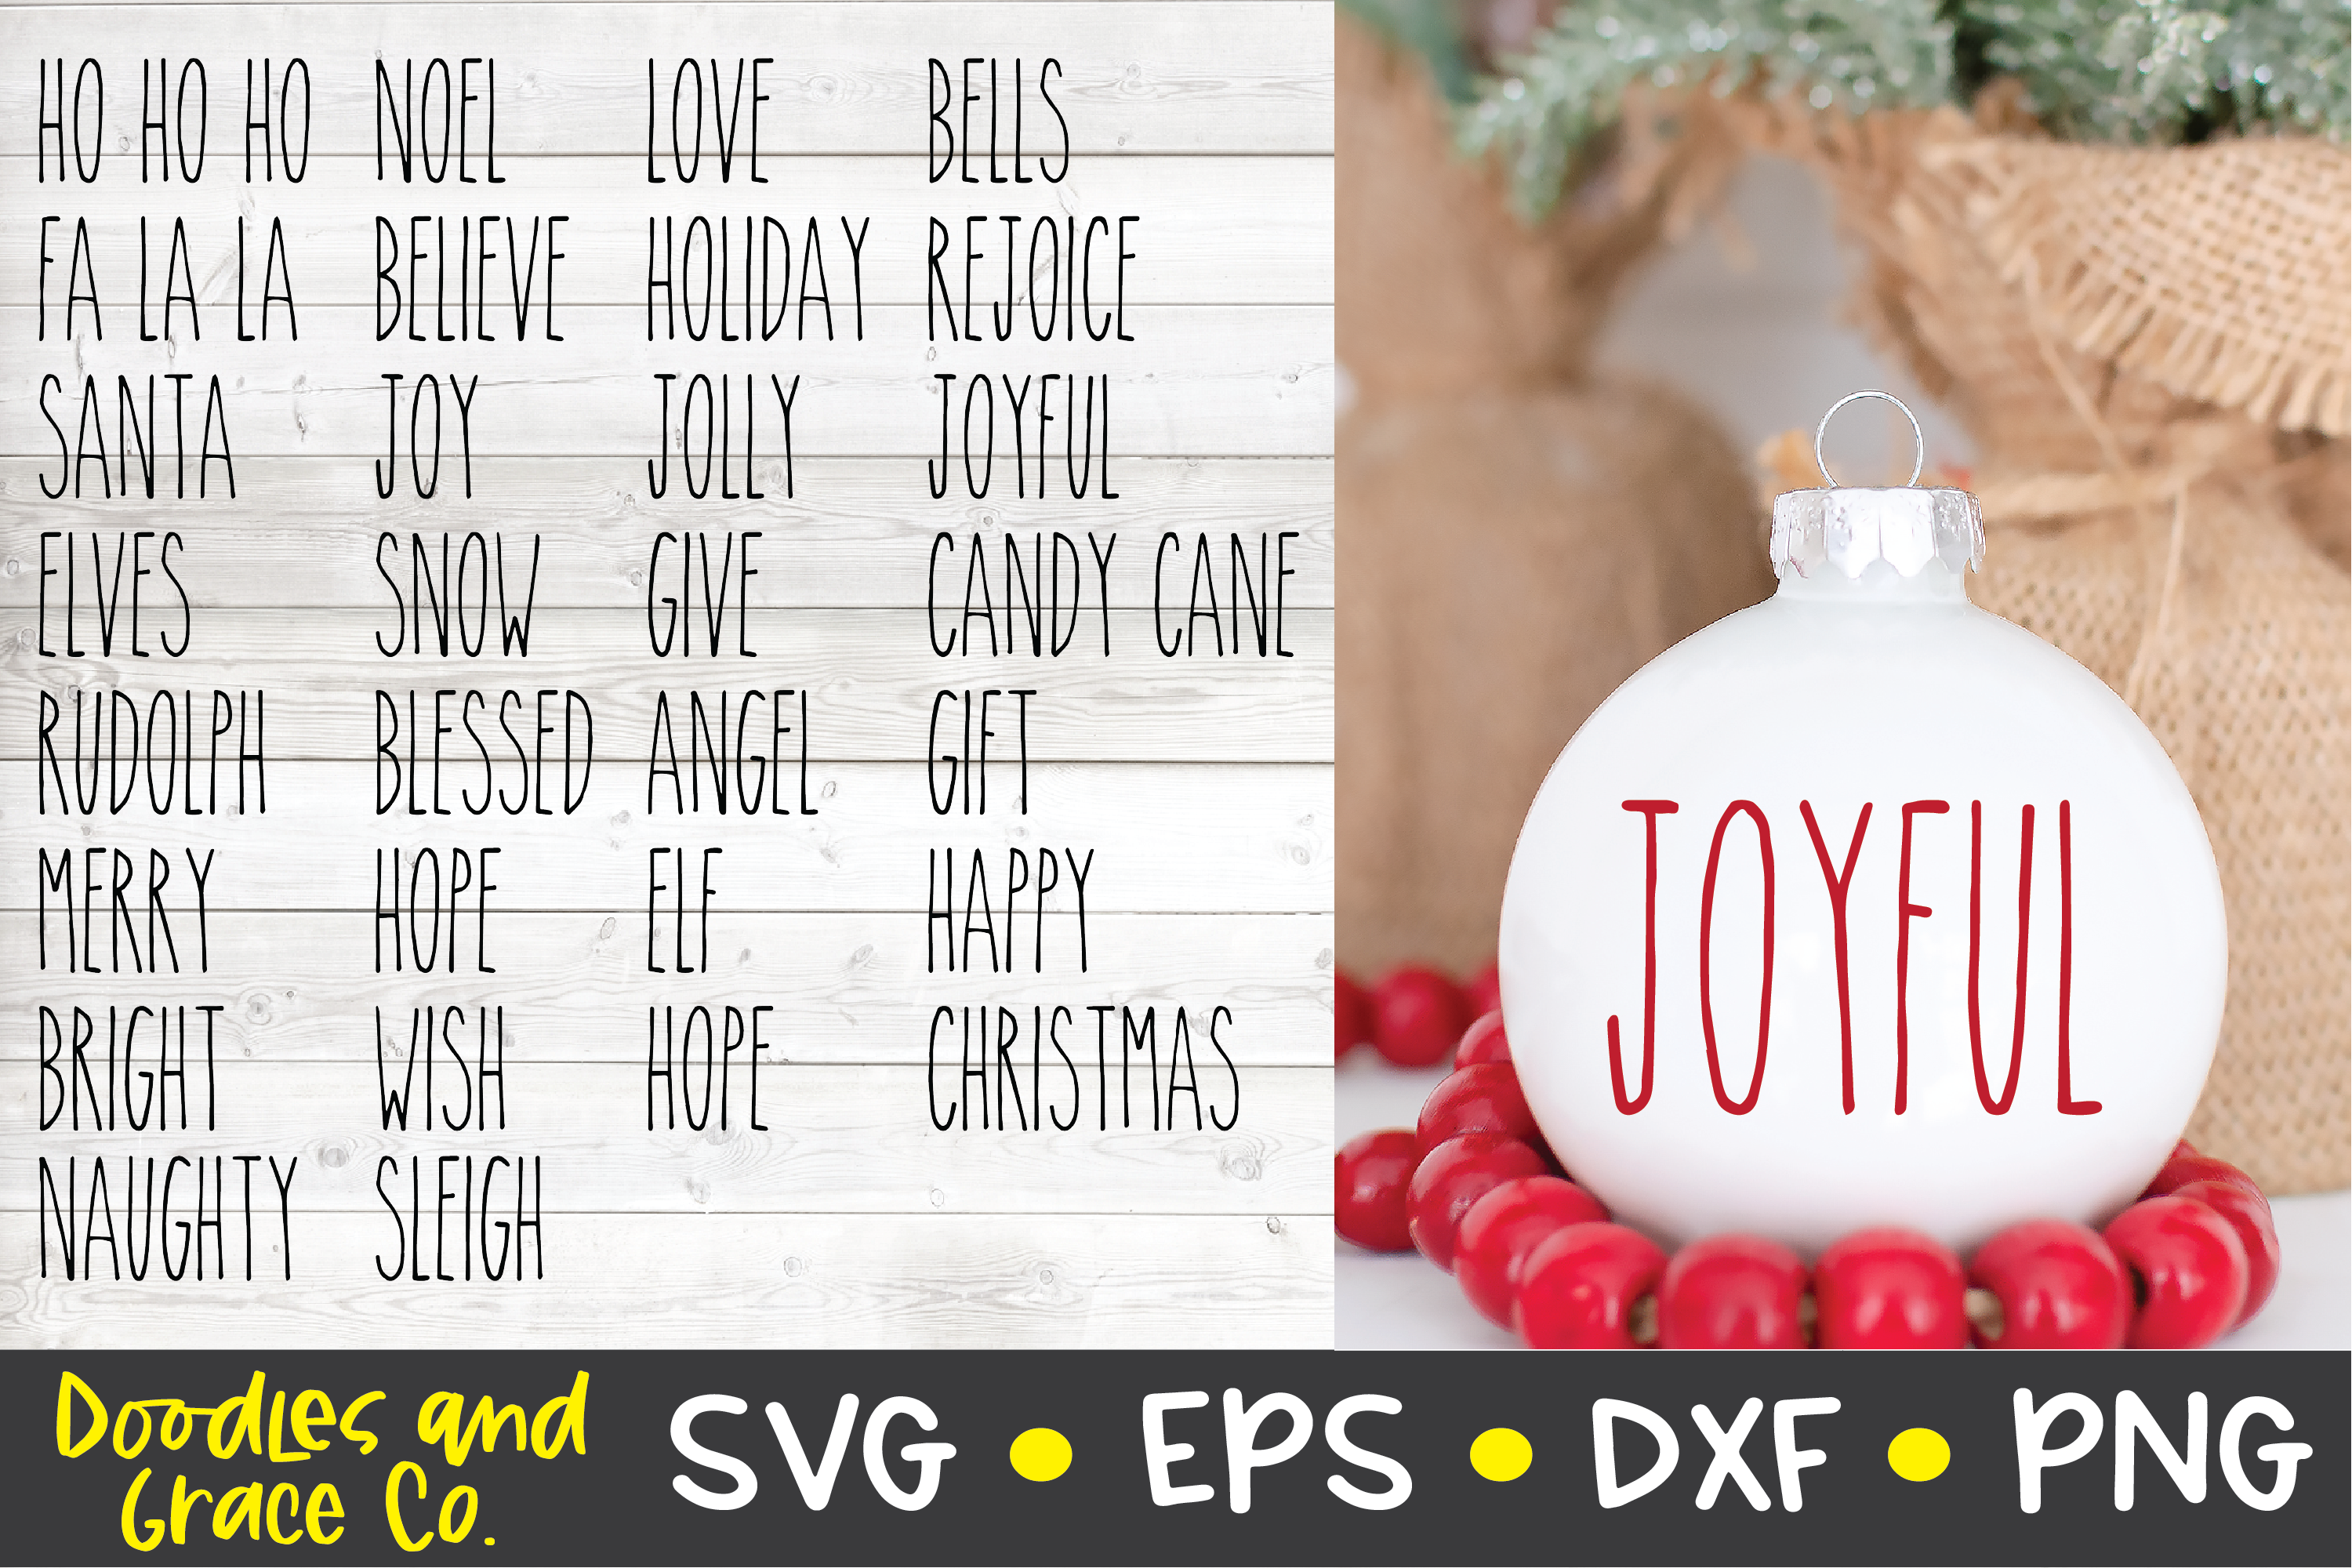 Download Rustic Christmas Words SVG - Christmas SVG - PNG - DXF ...